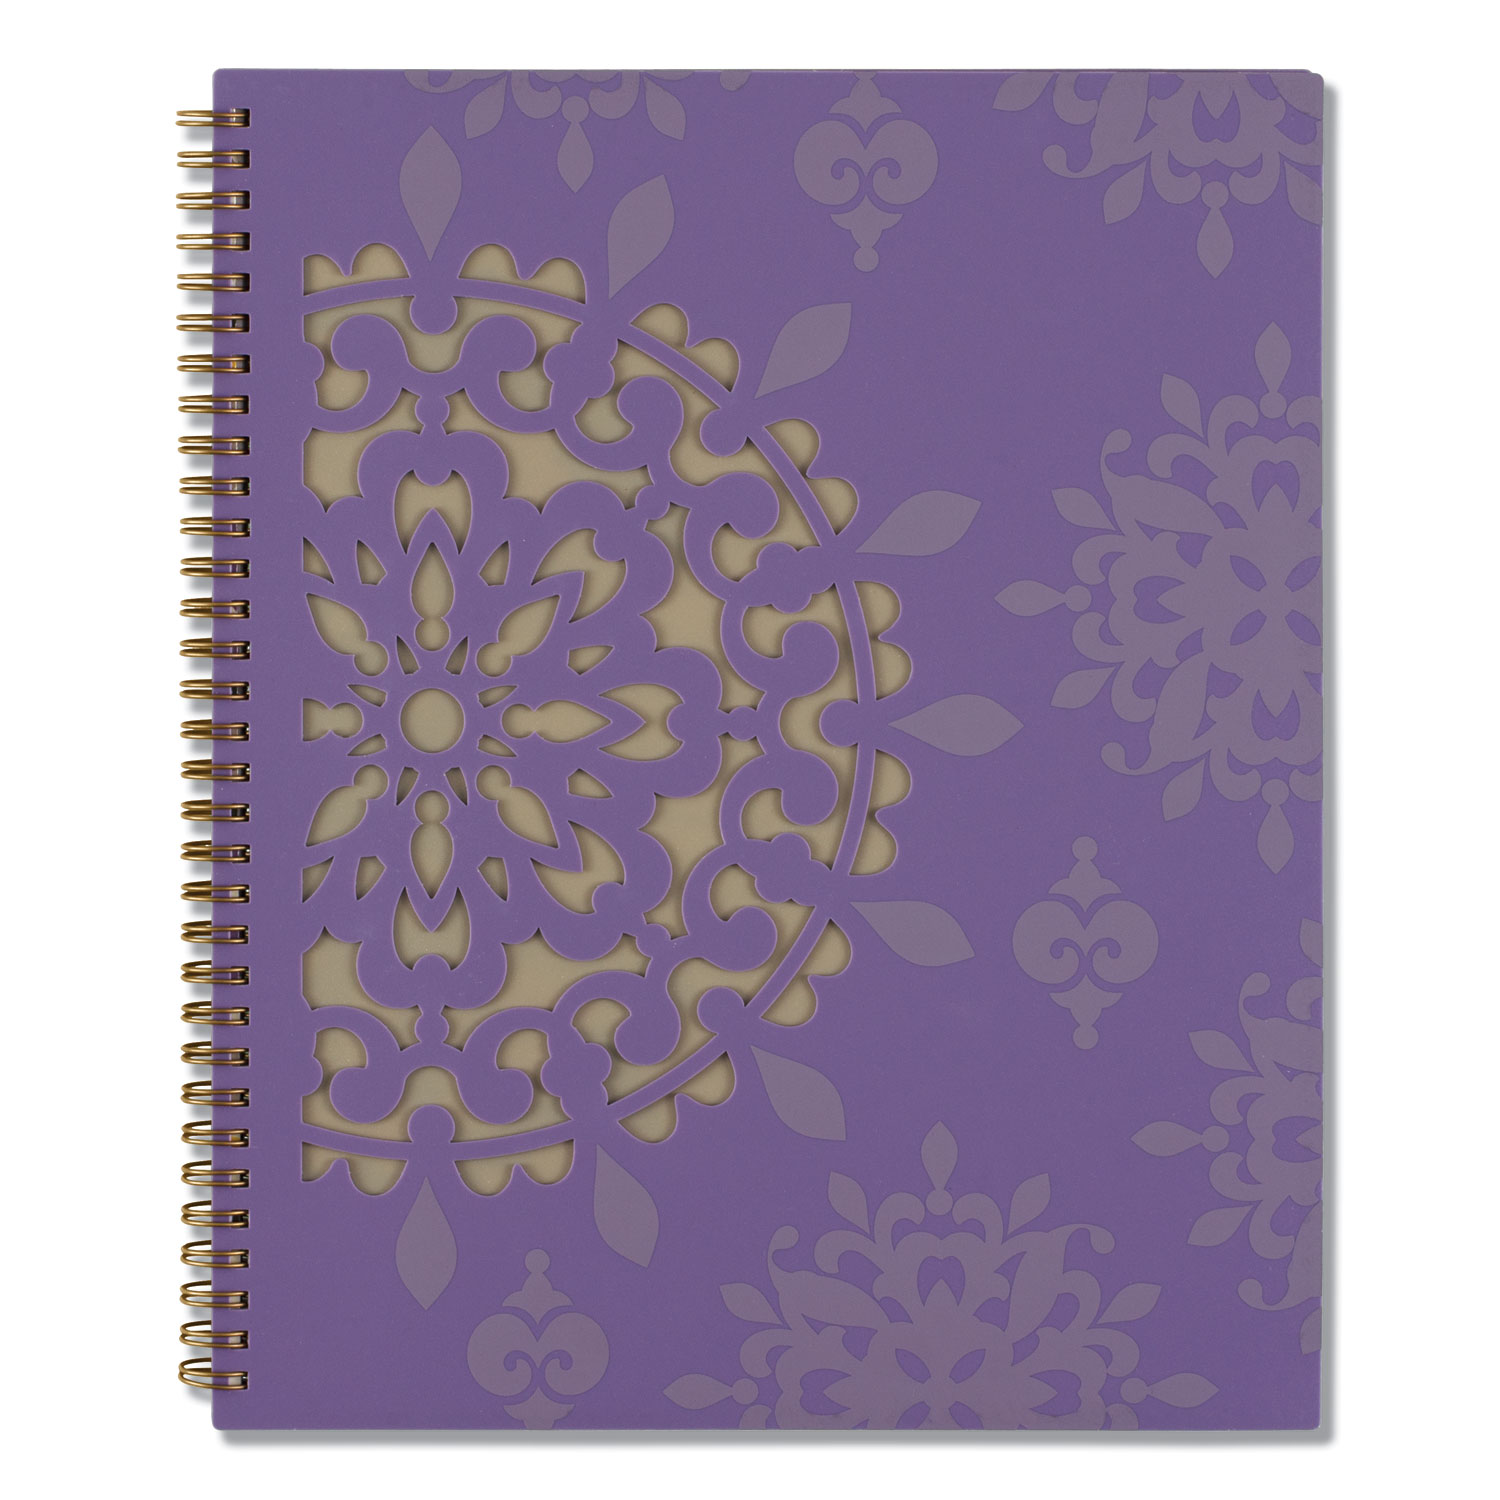  Cambridge 122-905 Vienna Weekly/Monthly Appointment Book, 11 x 8 1/2, Purple, 2020 (AAG122905) 